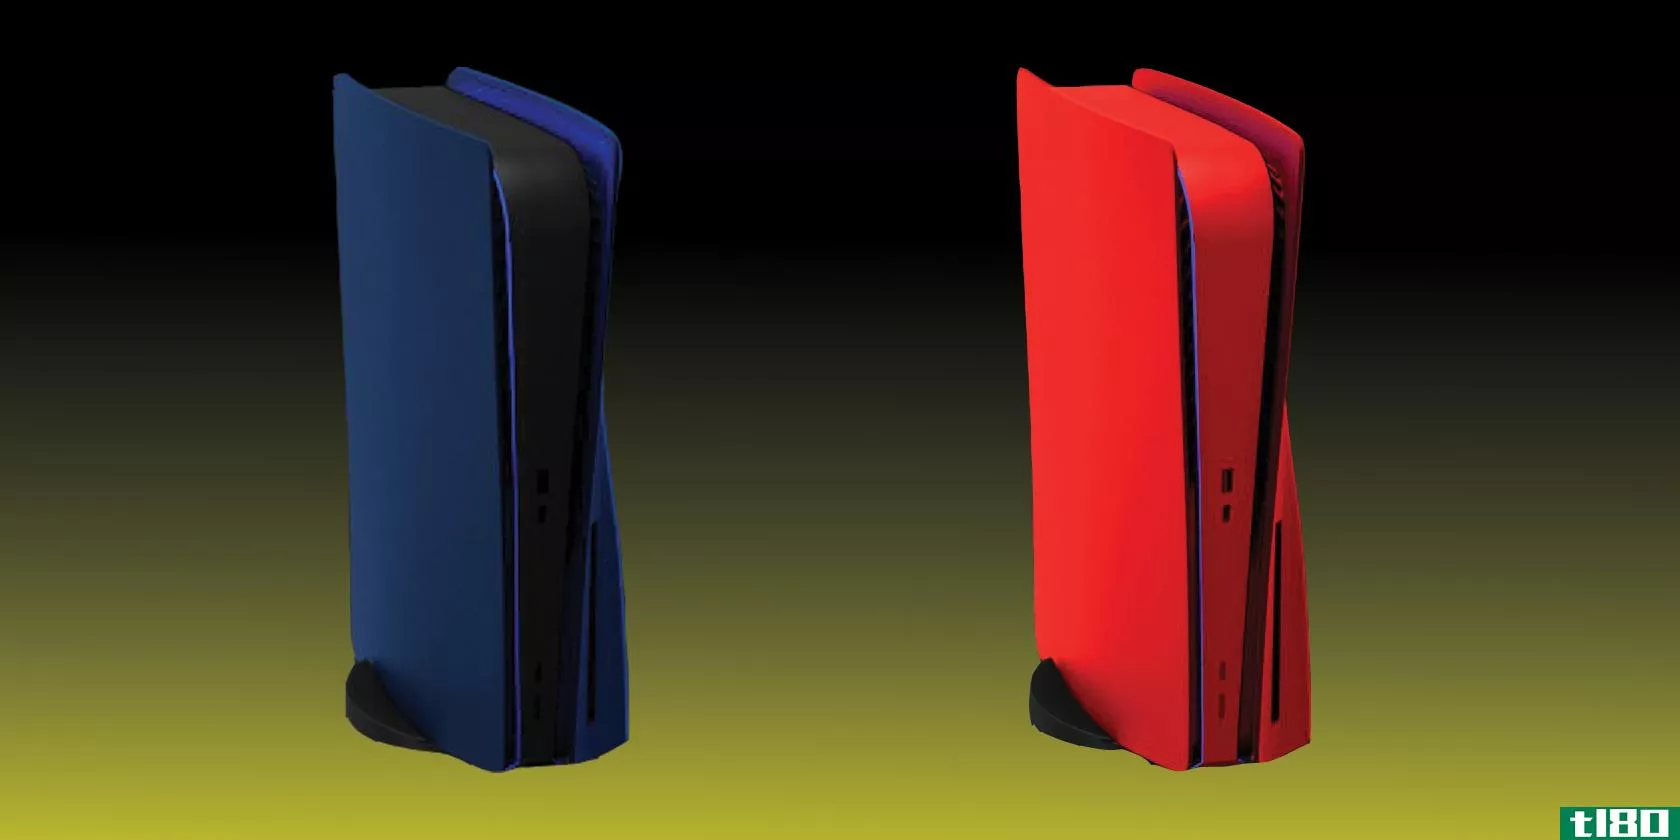 ps5 red and blue c***ole faceplates